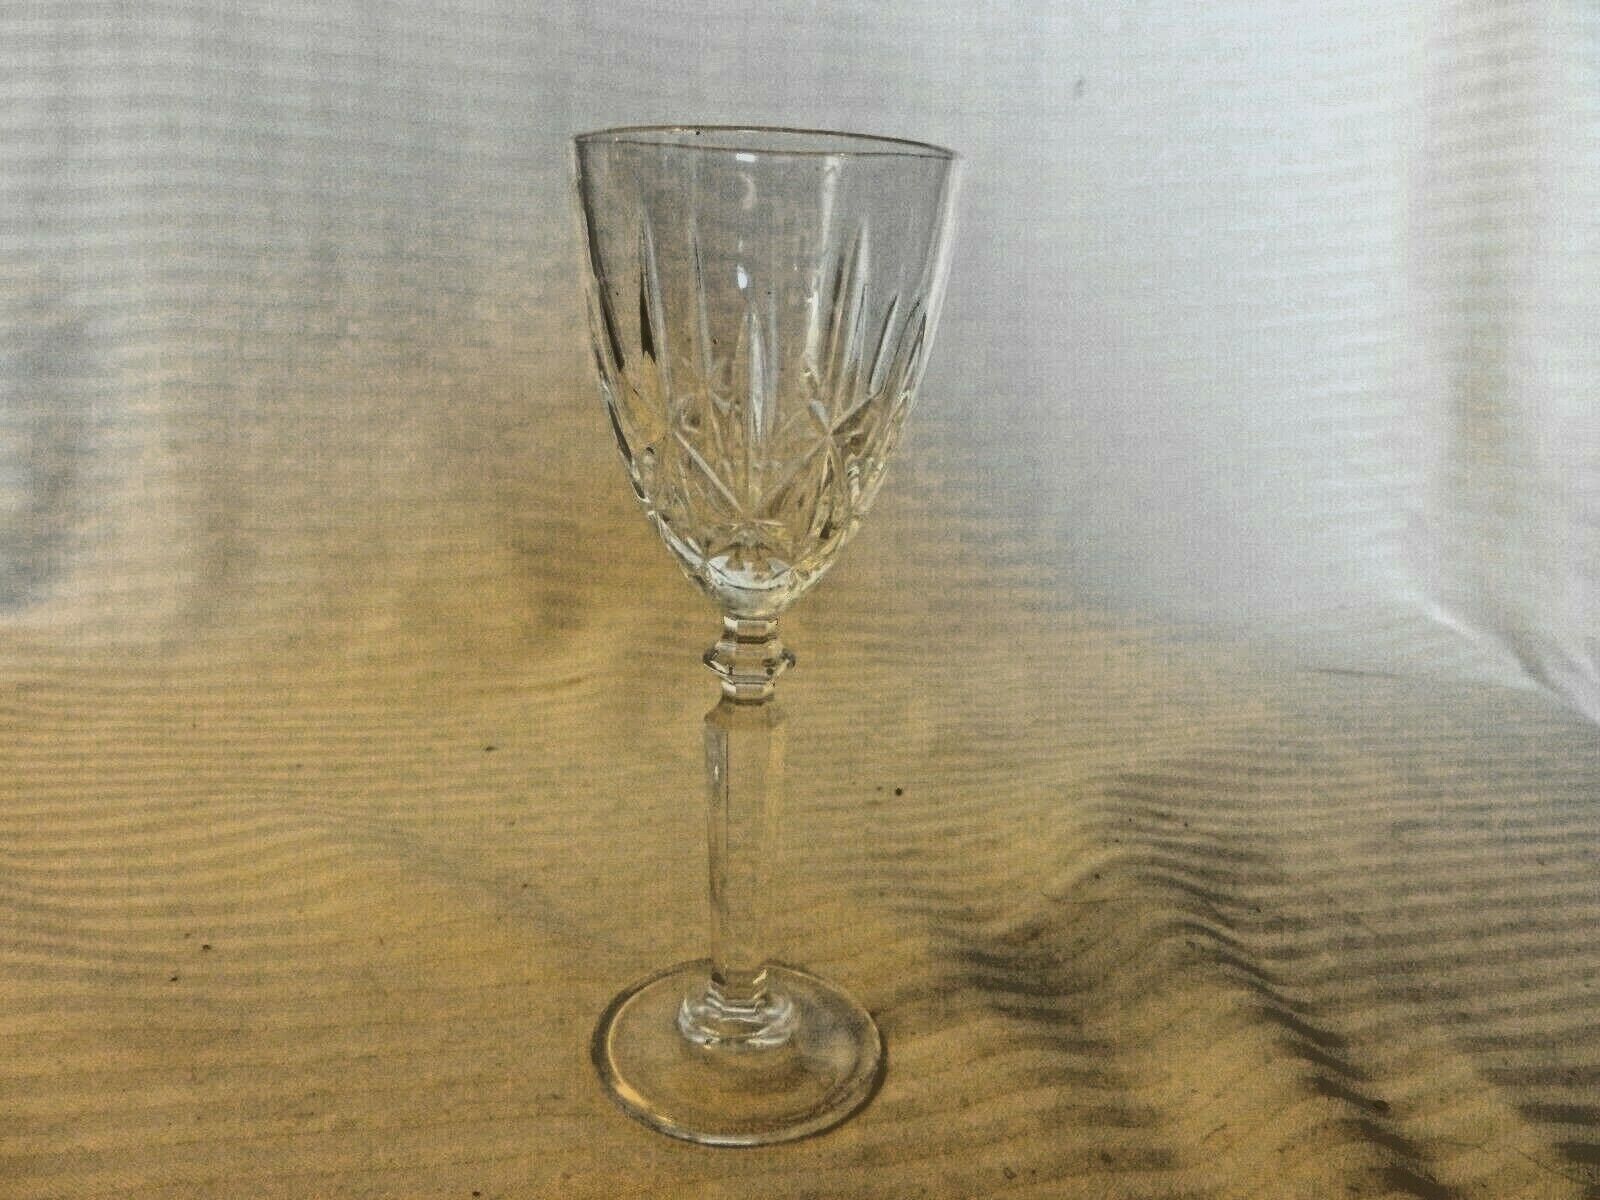 Primary image for Vintage Clear Crystal Aperitif or Cordial Glass Engraved Design 5.625" Tall